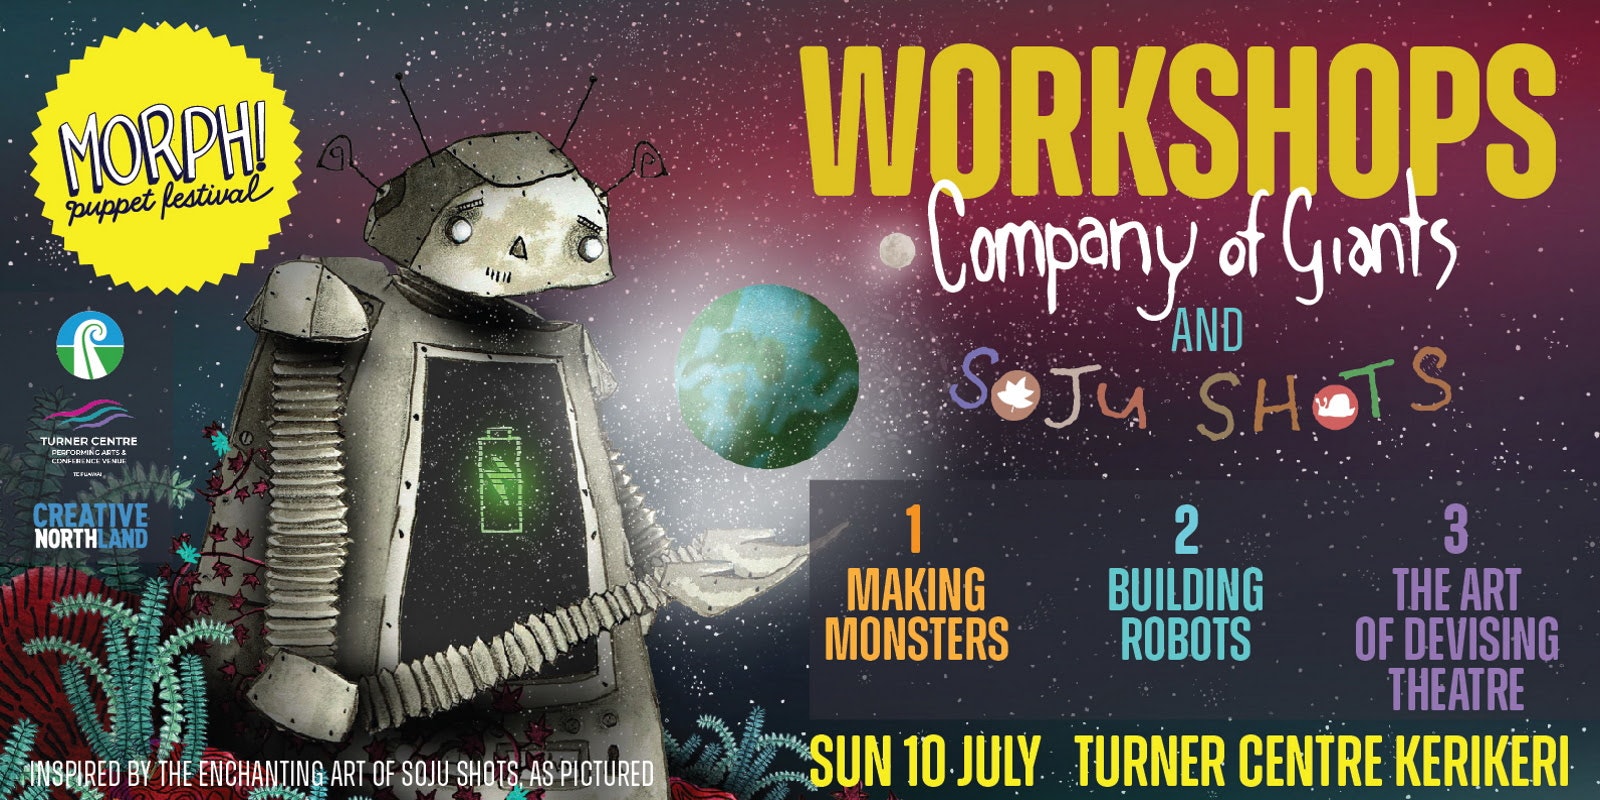 Workshops with Company of Giants and Soju Shots